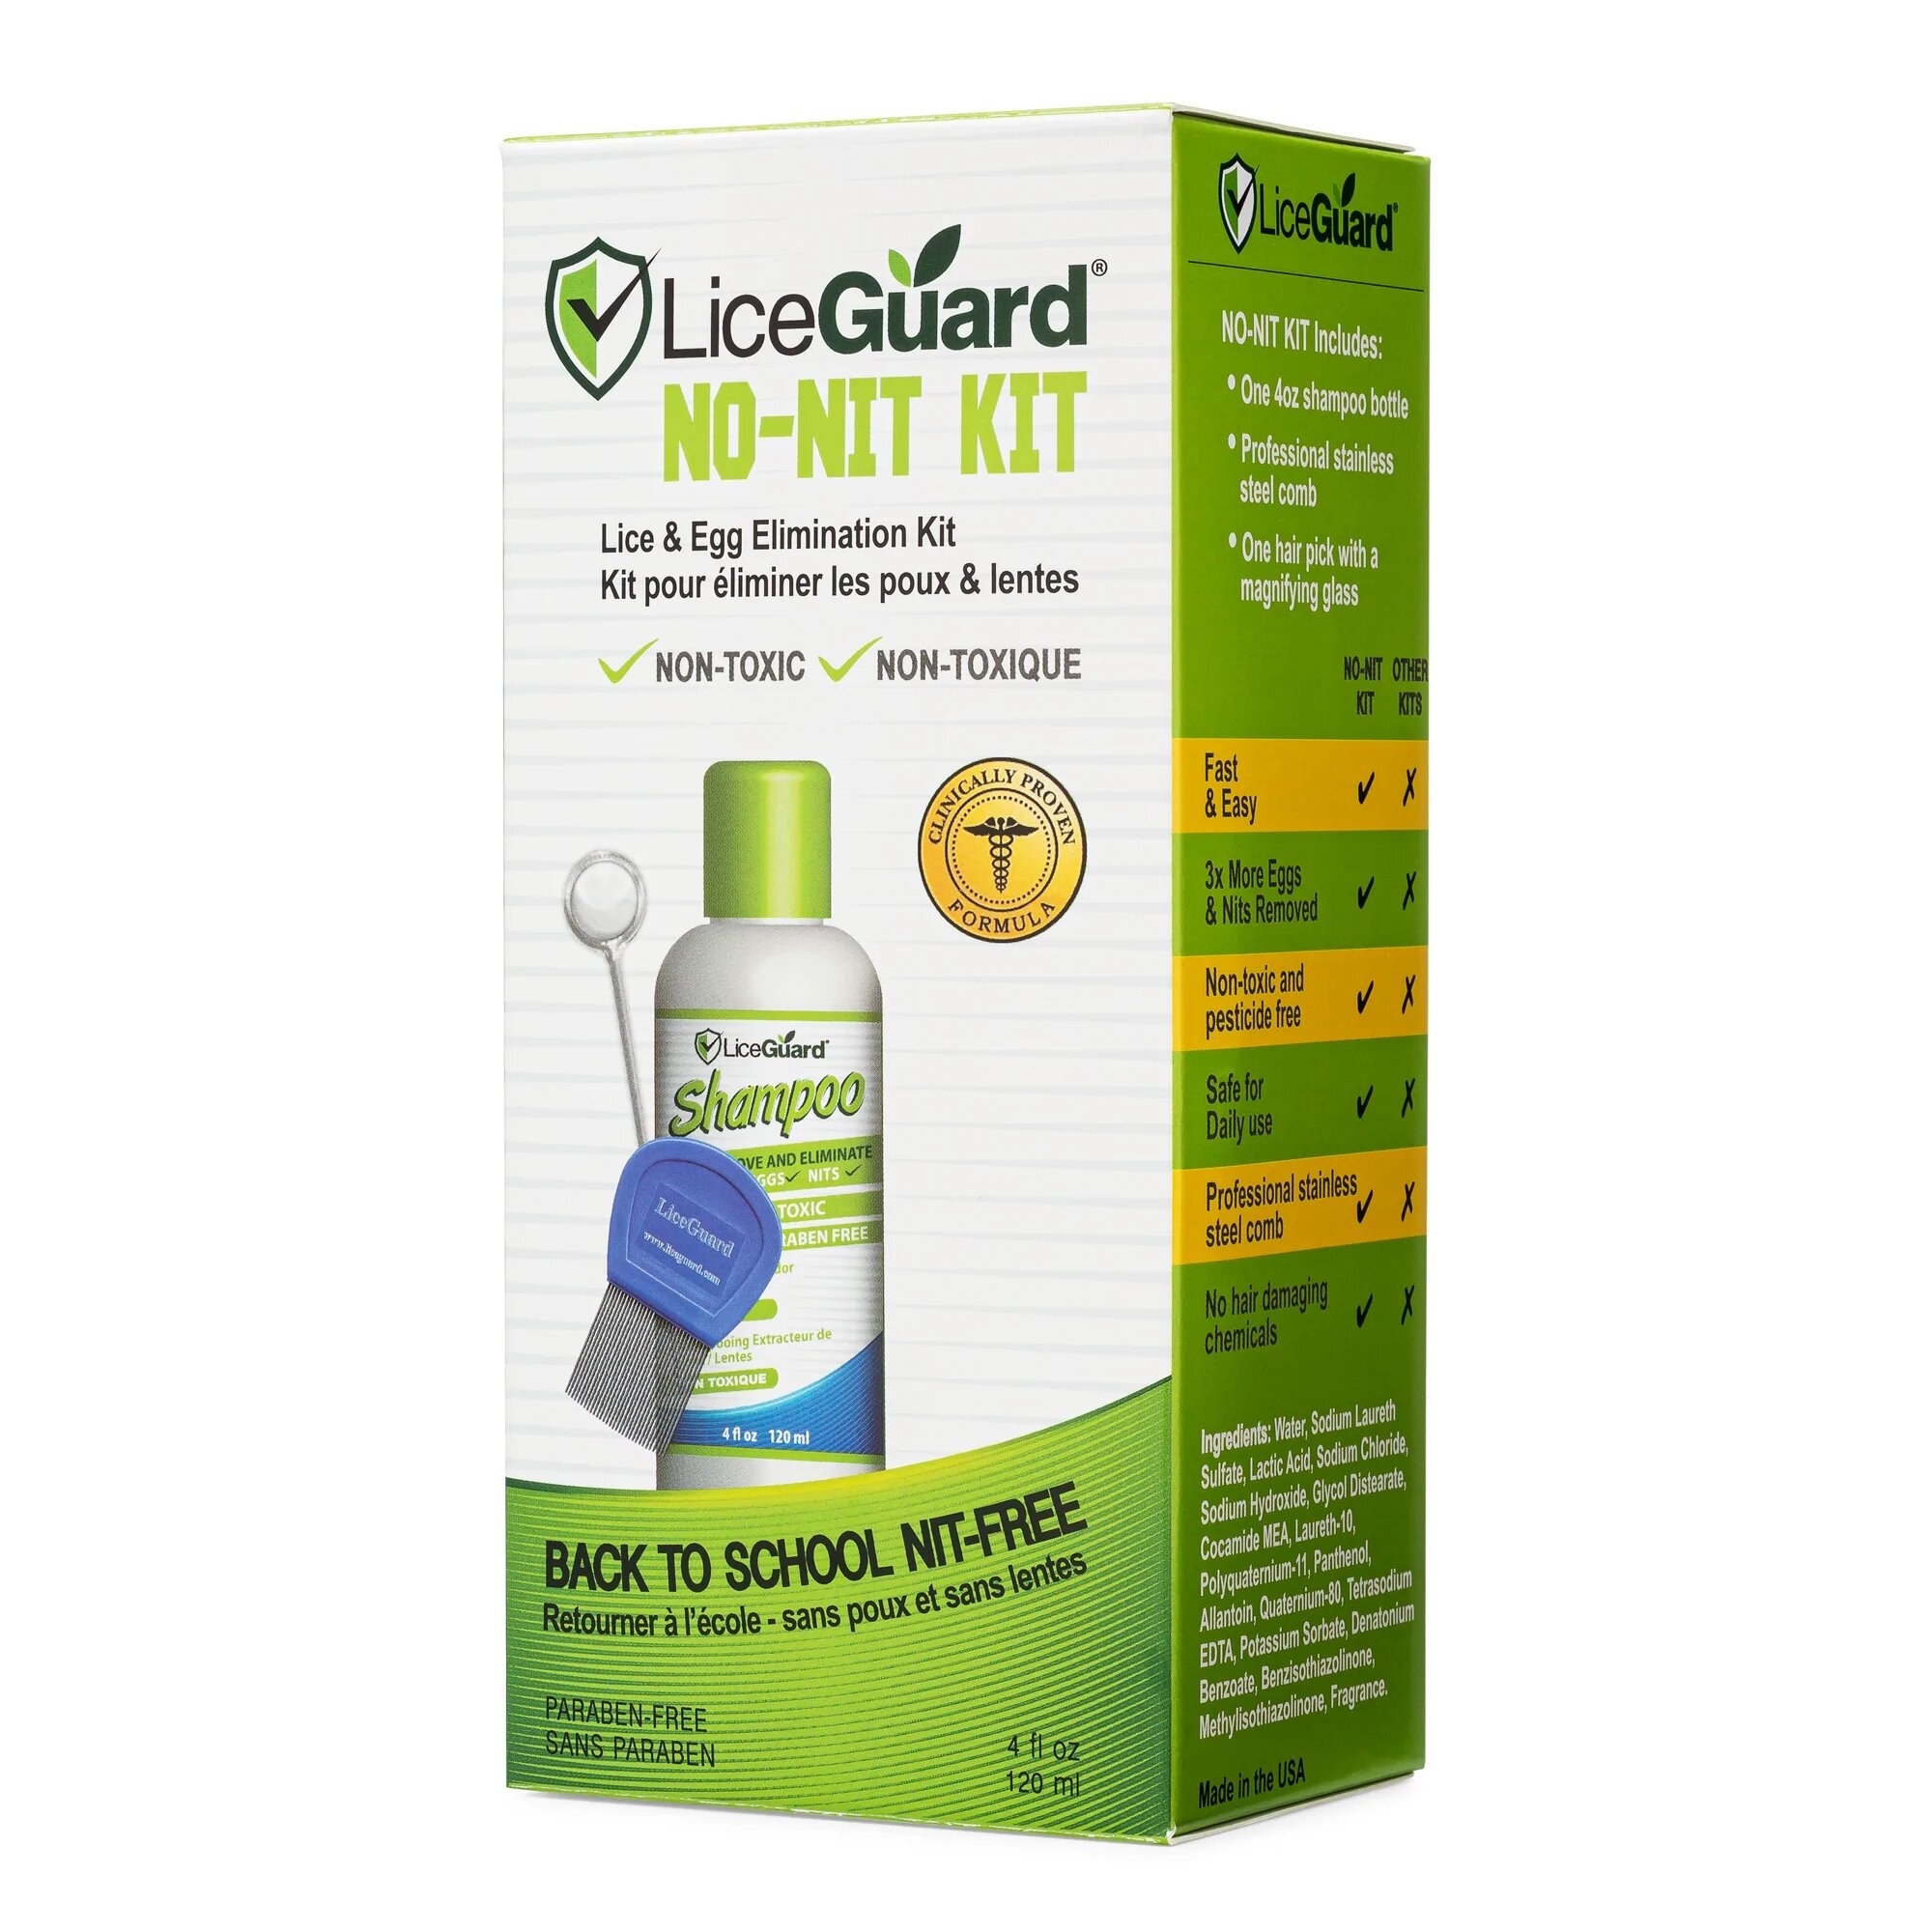 a box of the liceguard kit